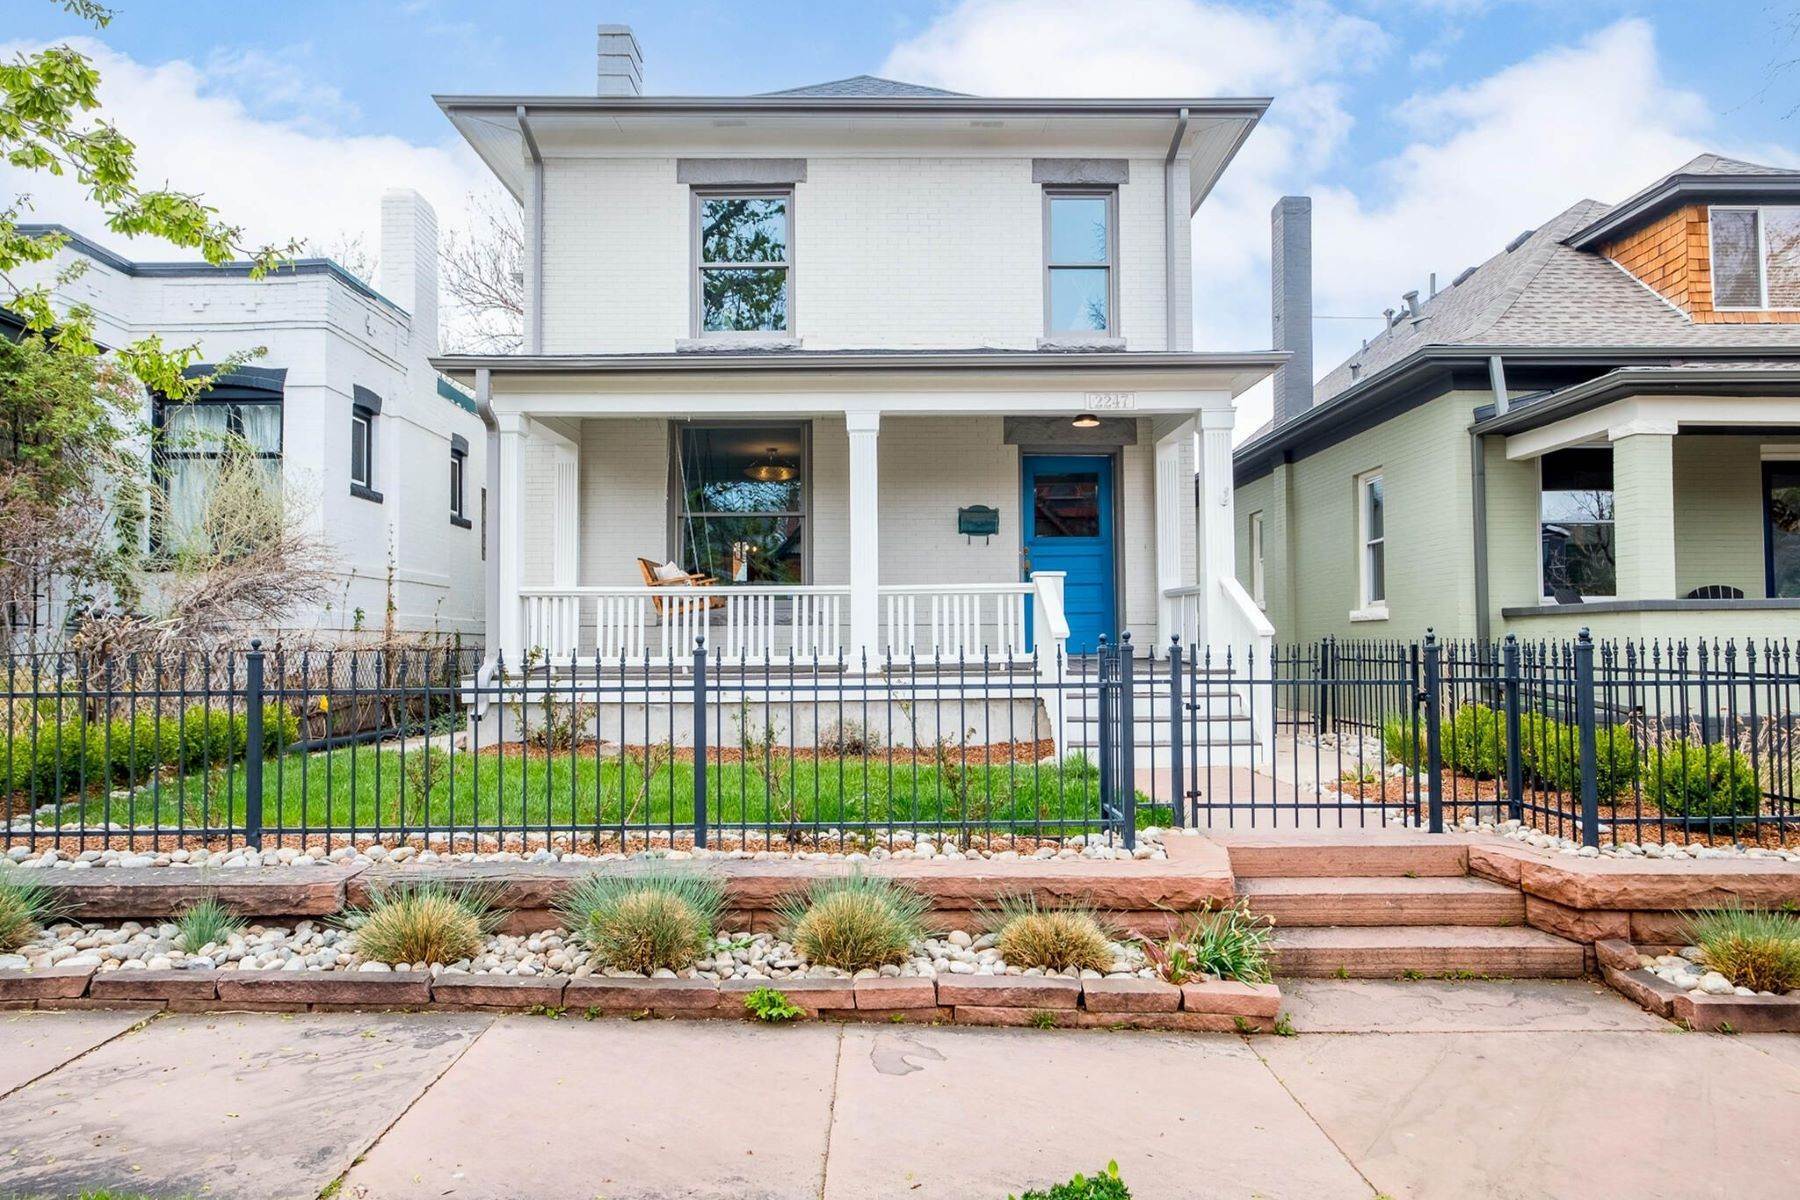 Property for Active at Updated Denver Square LoHi 2247 W 34th Avenue Denver, Colorado 80211 United States